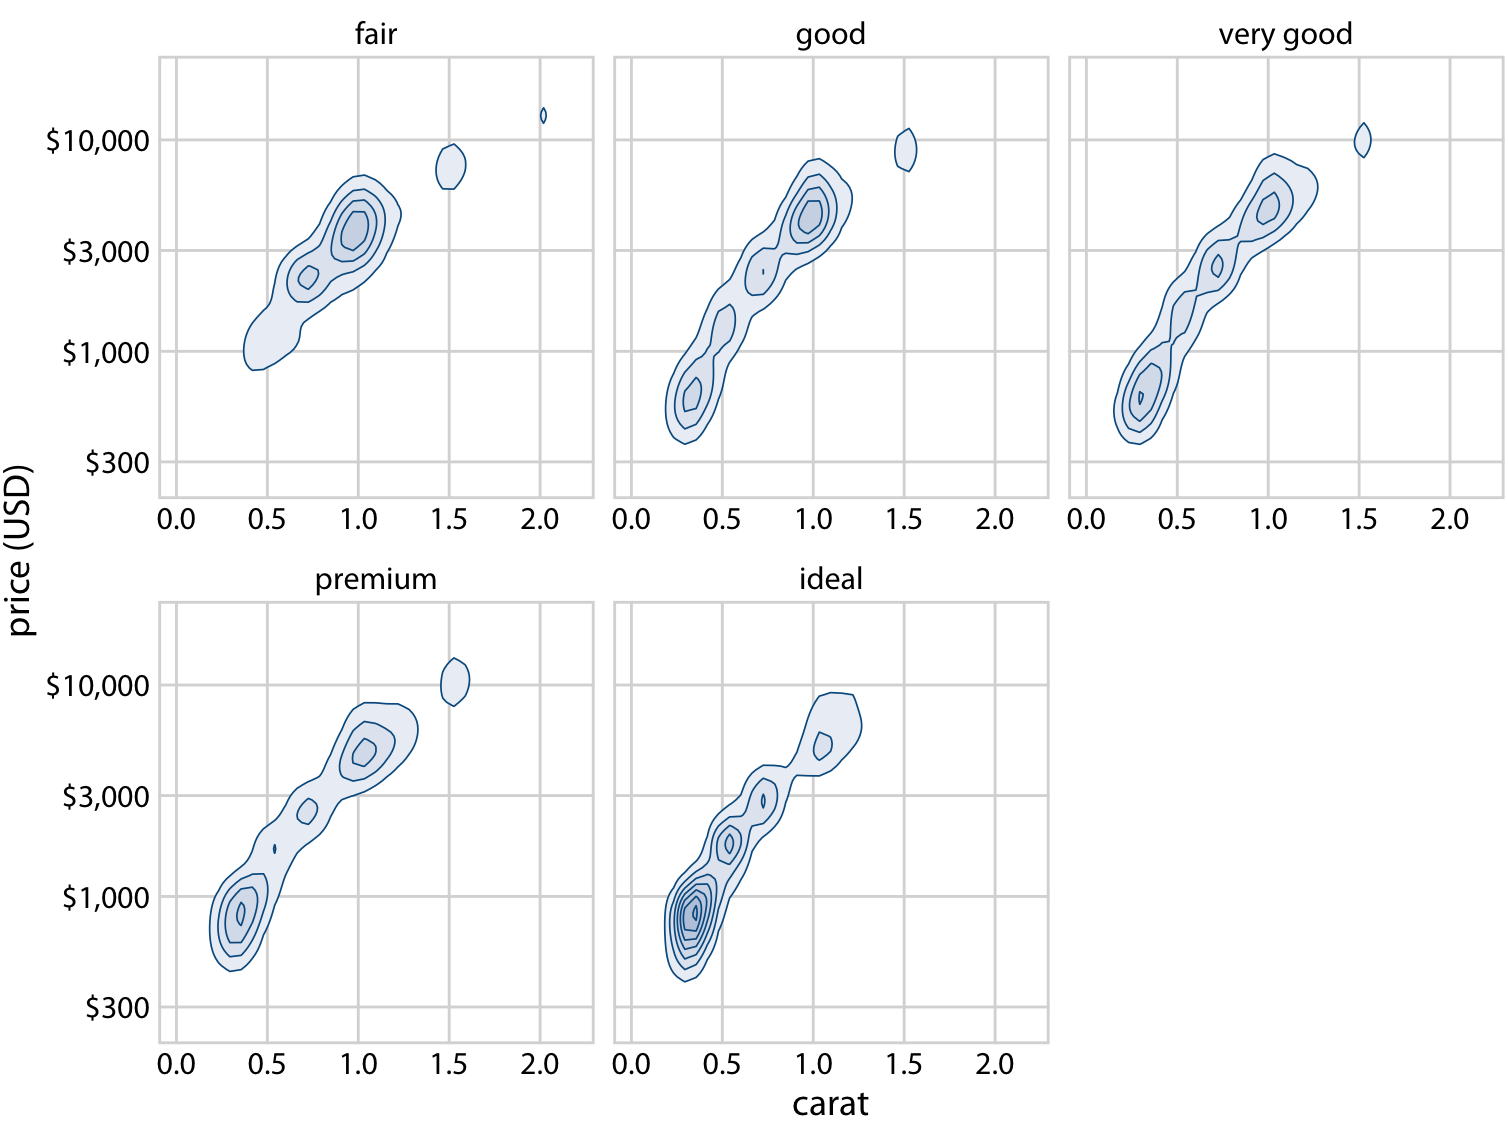 Price of diamonds versus their carat value. Here, we have taken the density contours from Figure 18.12 and drawn them separately for each cut. We can now see that better cuts (very good, premium, ideal) tend to have lower carat values than the poorer cuts (fair, good) but command a higher price per carat. Data source: Hadley Wickham, ggplot2